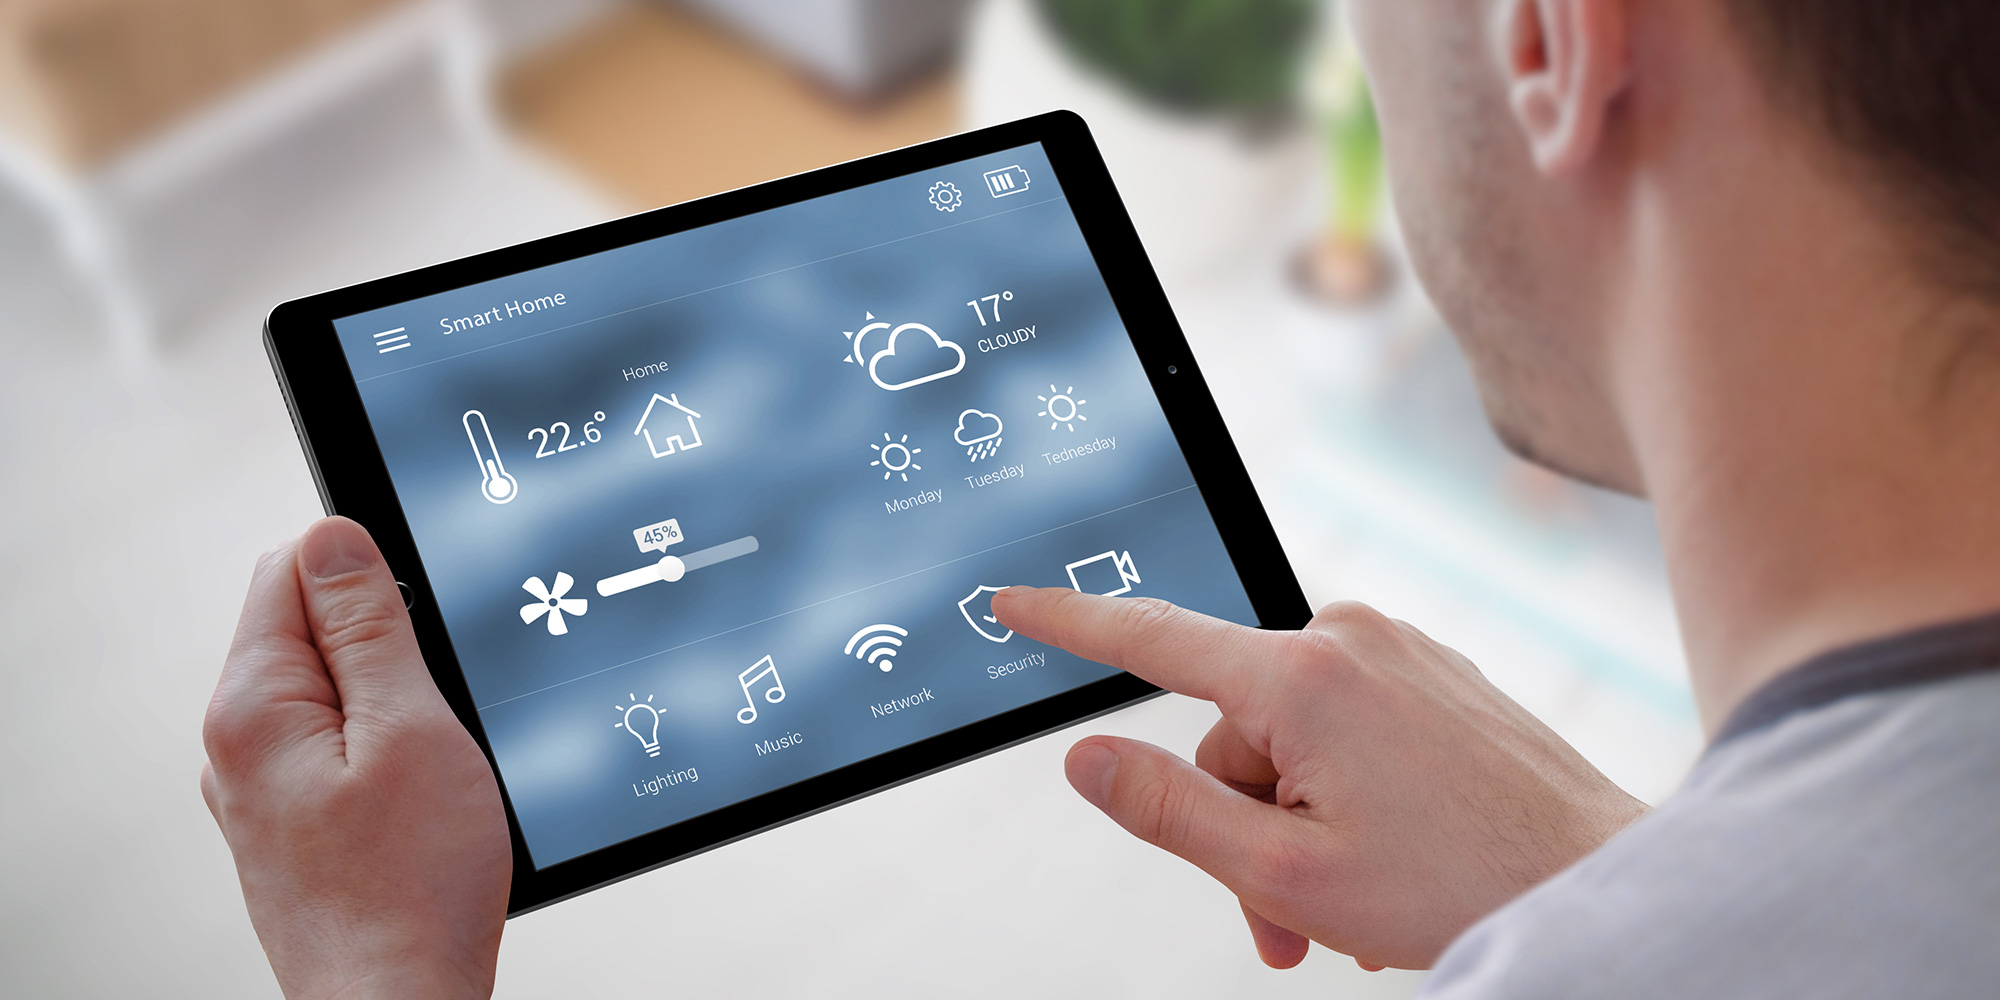 Smart home, control your home with your iPad